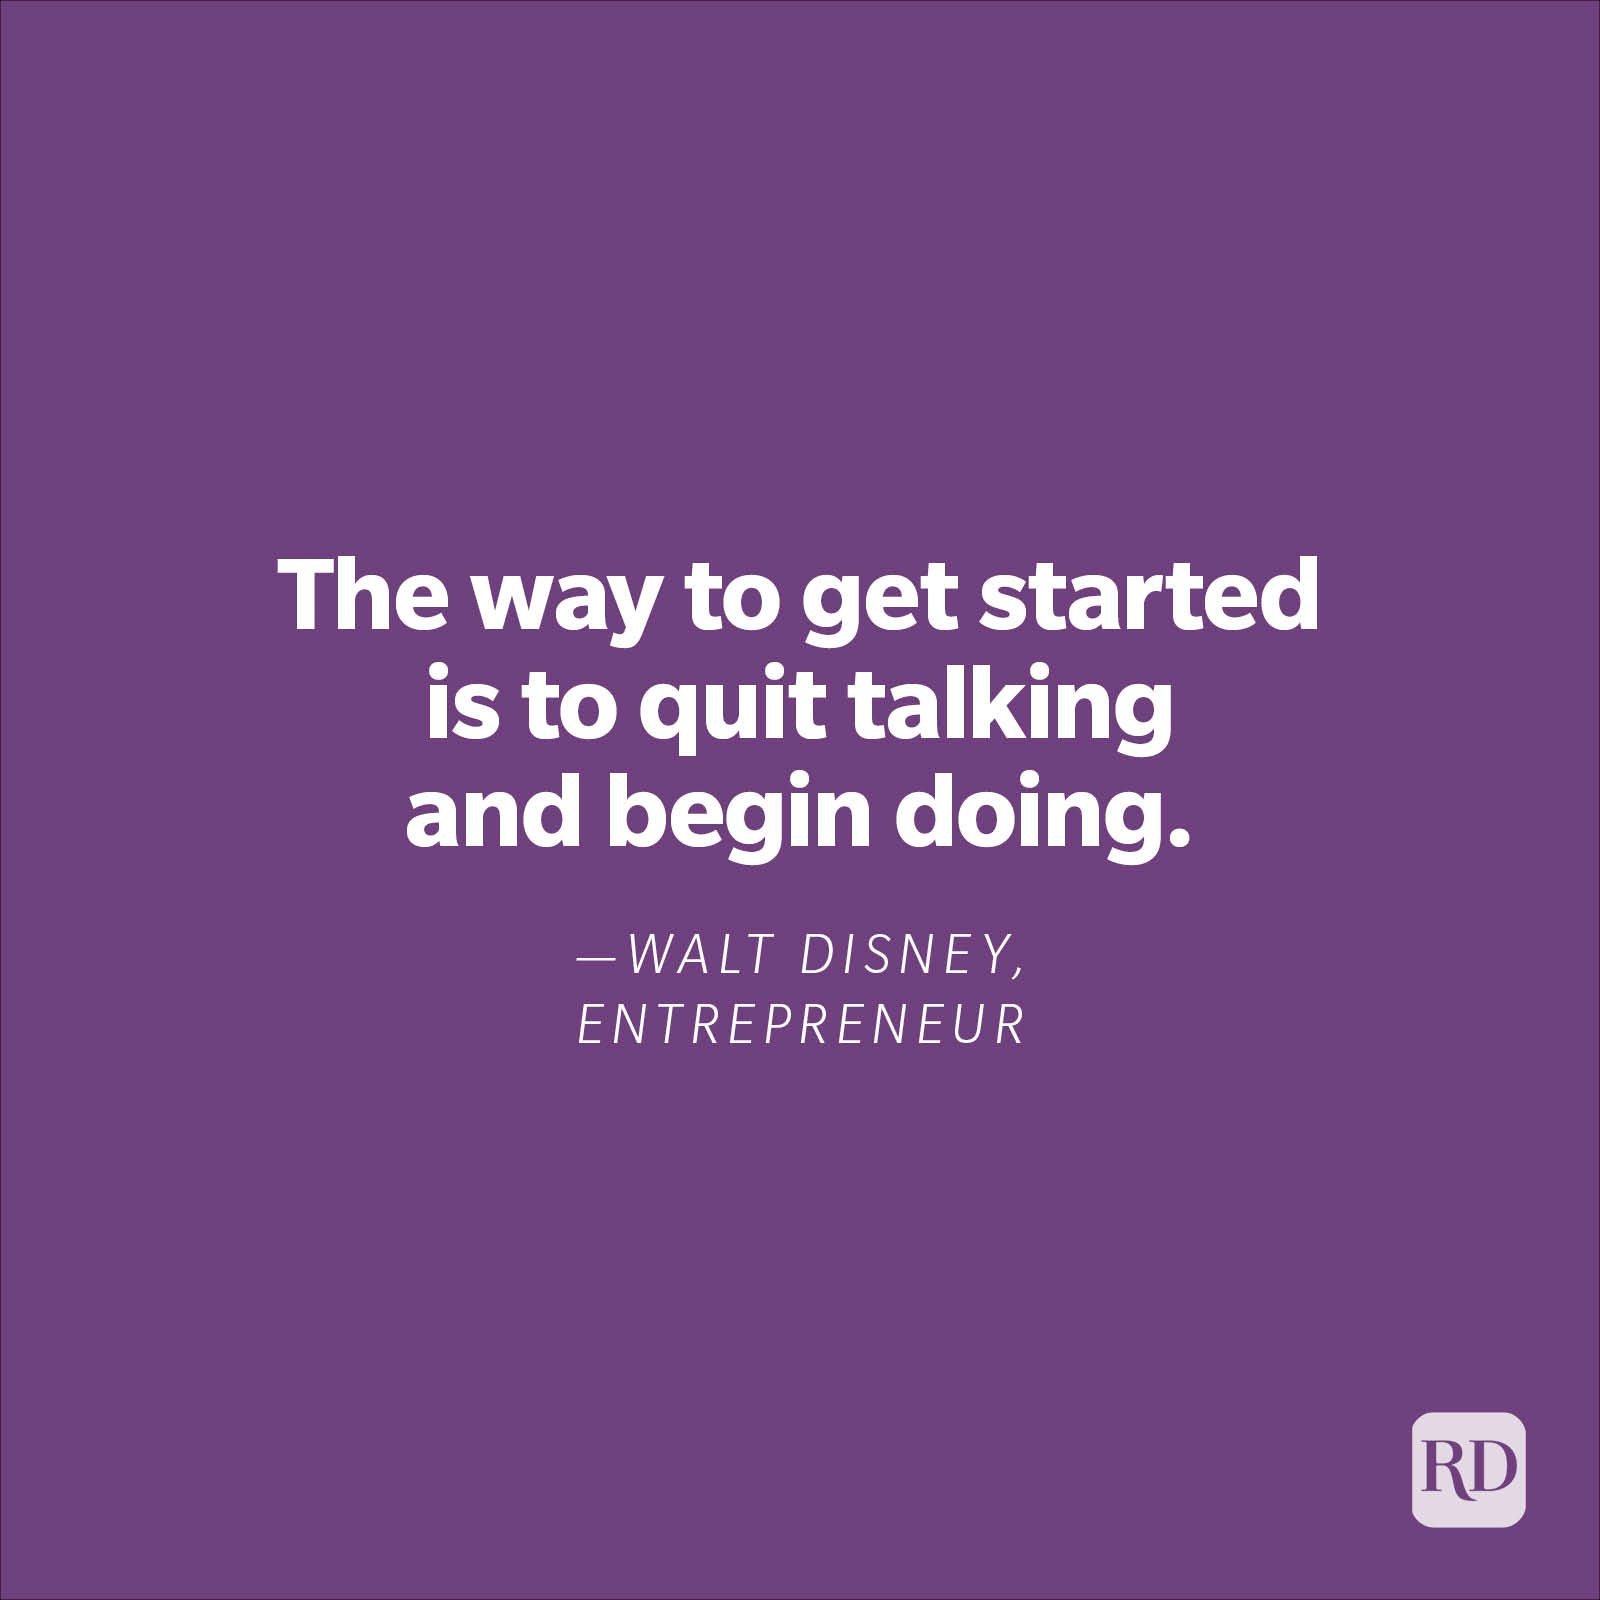 "The way to get started is to quit talking and begin doing." —Walt Disney, entrepreneur